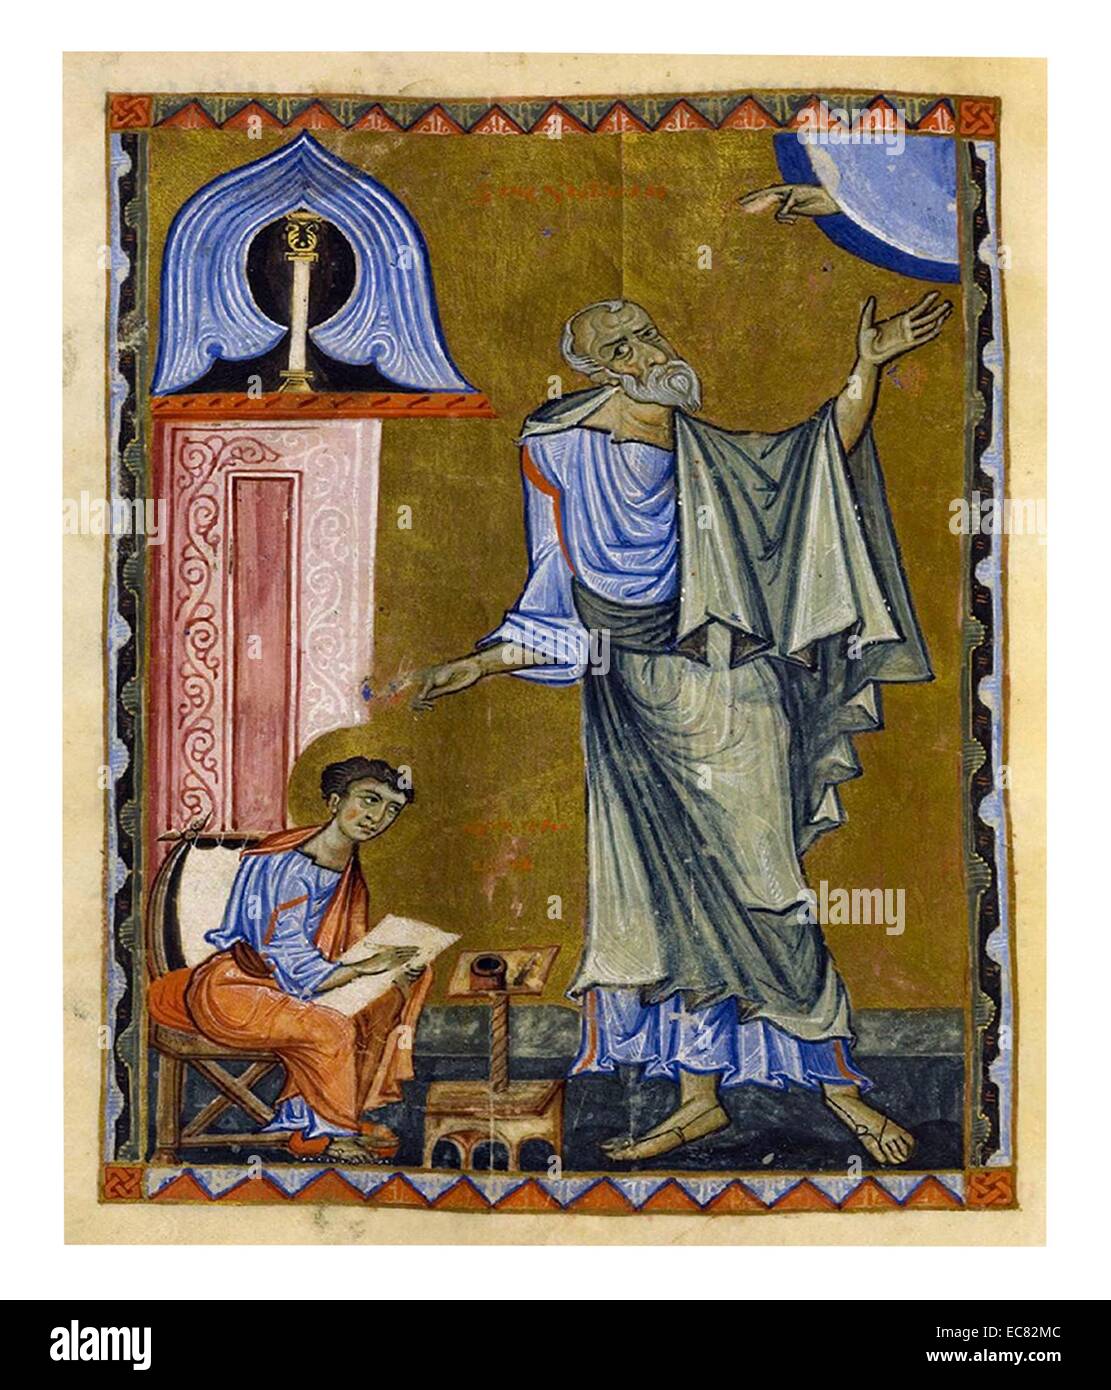 page from the Skevra Evangeliary (Lviv Evangeliary 1198. An Evangeliary or evangelion is a liturgical book containing those portions of the four gospels which are read during Mass or in the public offices of the Church Stock Photo